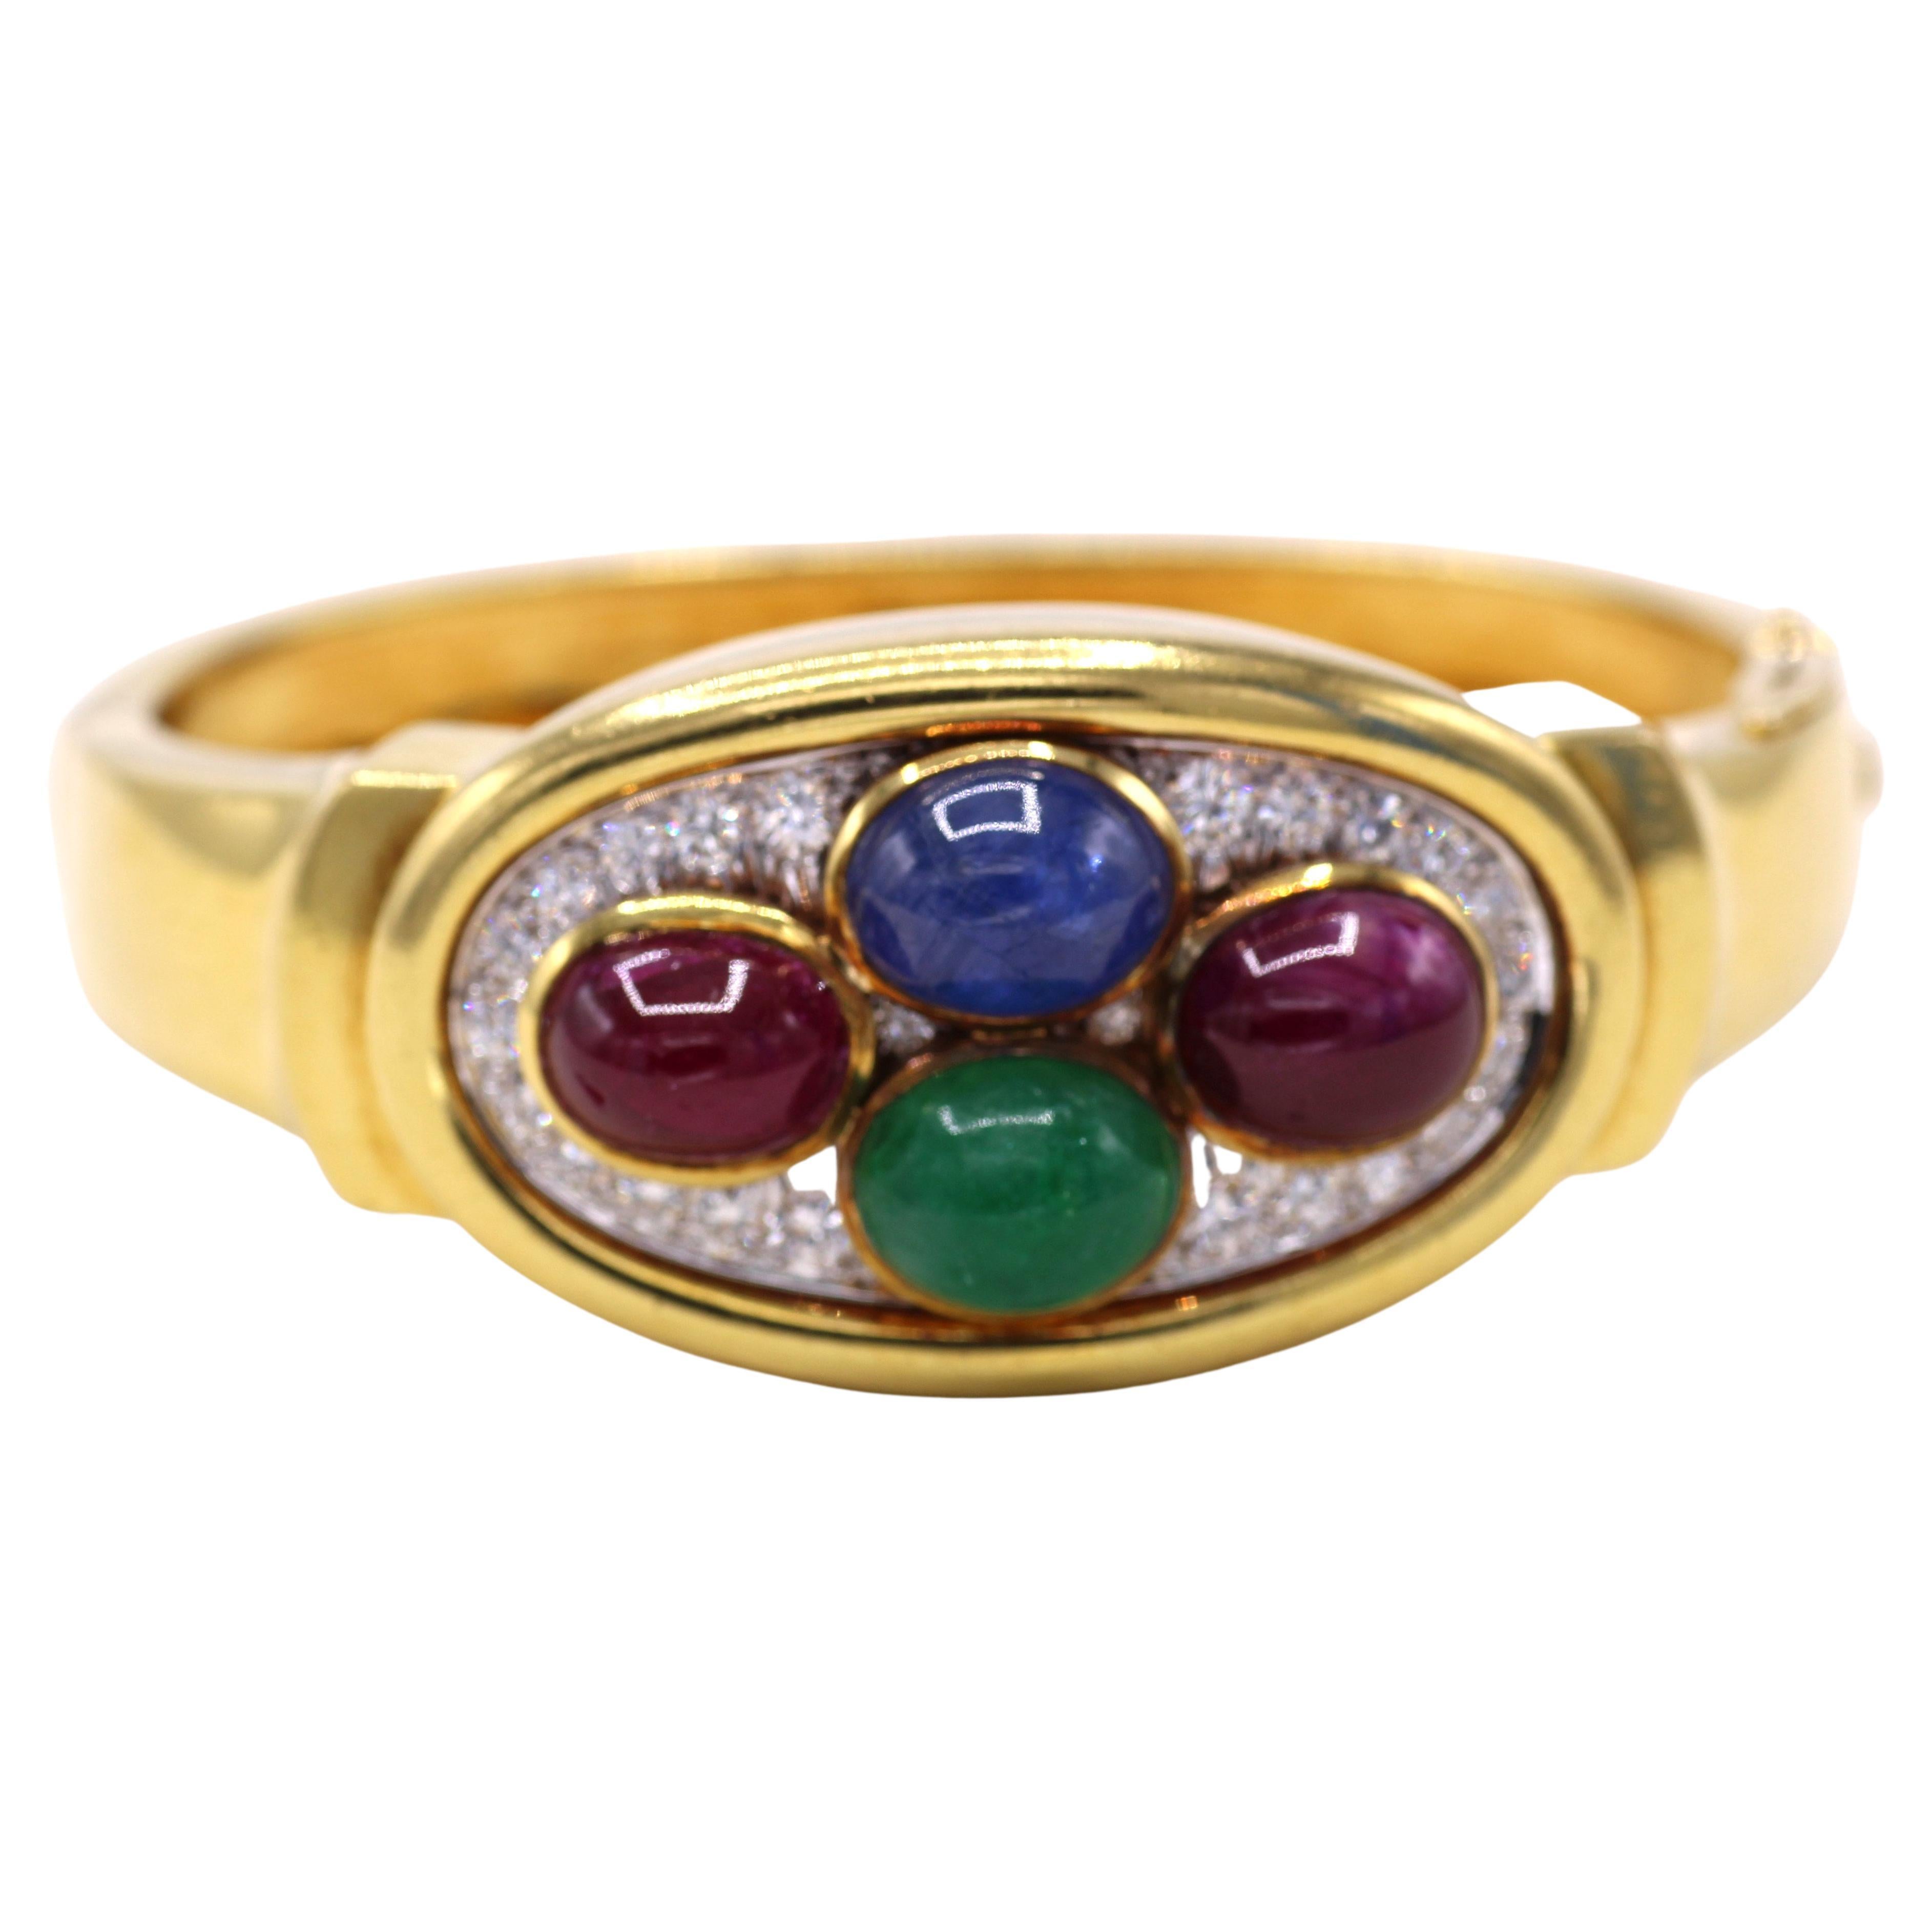 Beautifully designed and masterfully handcrafted, this bangle bracelet by David Webb from ca 1980 displays a fun and colorful array of gemstones worked in platinum and 18 karat yellow gold. 2 cabochon rubies, 1 cabochon sapphire and 1 cabochon